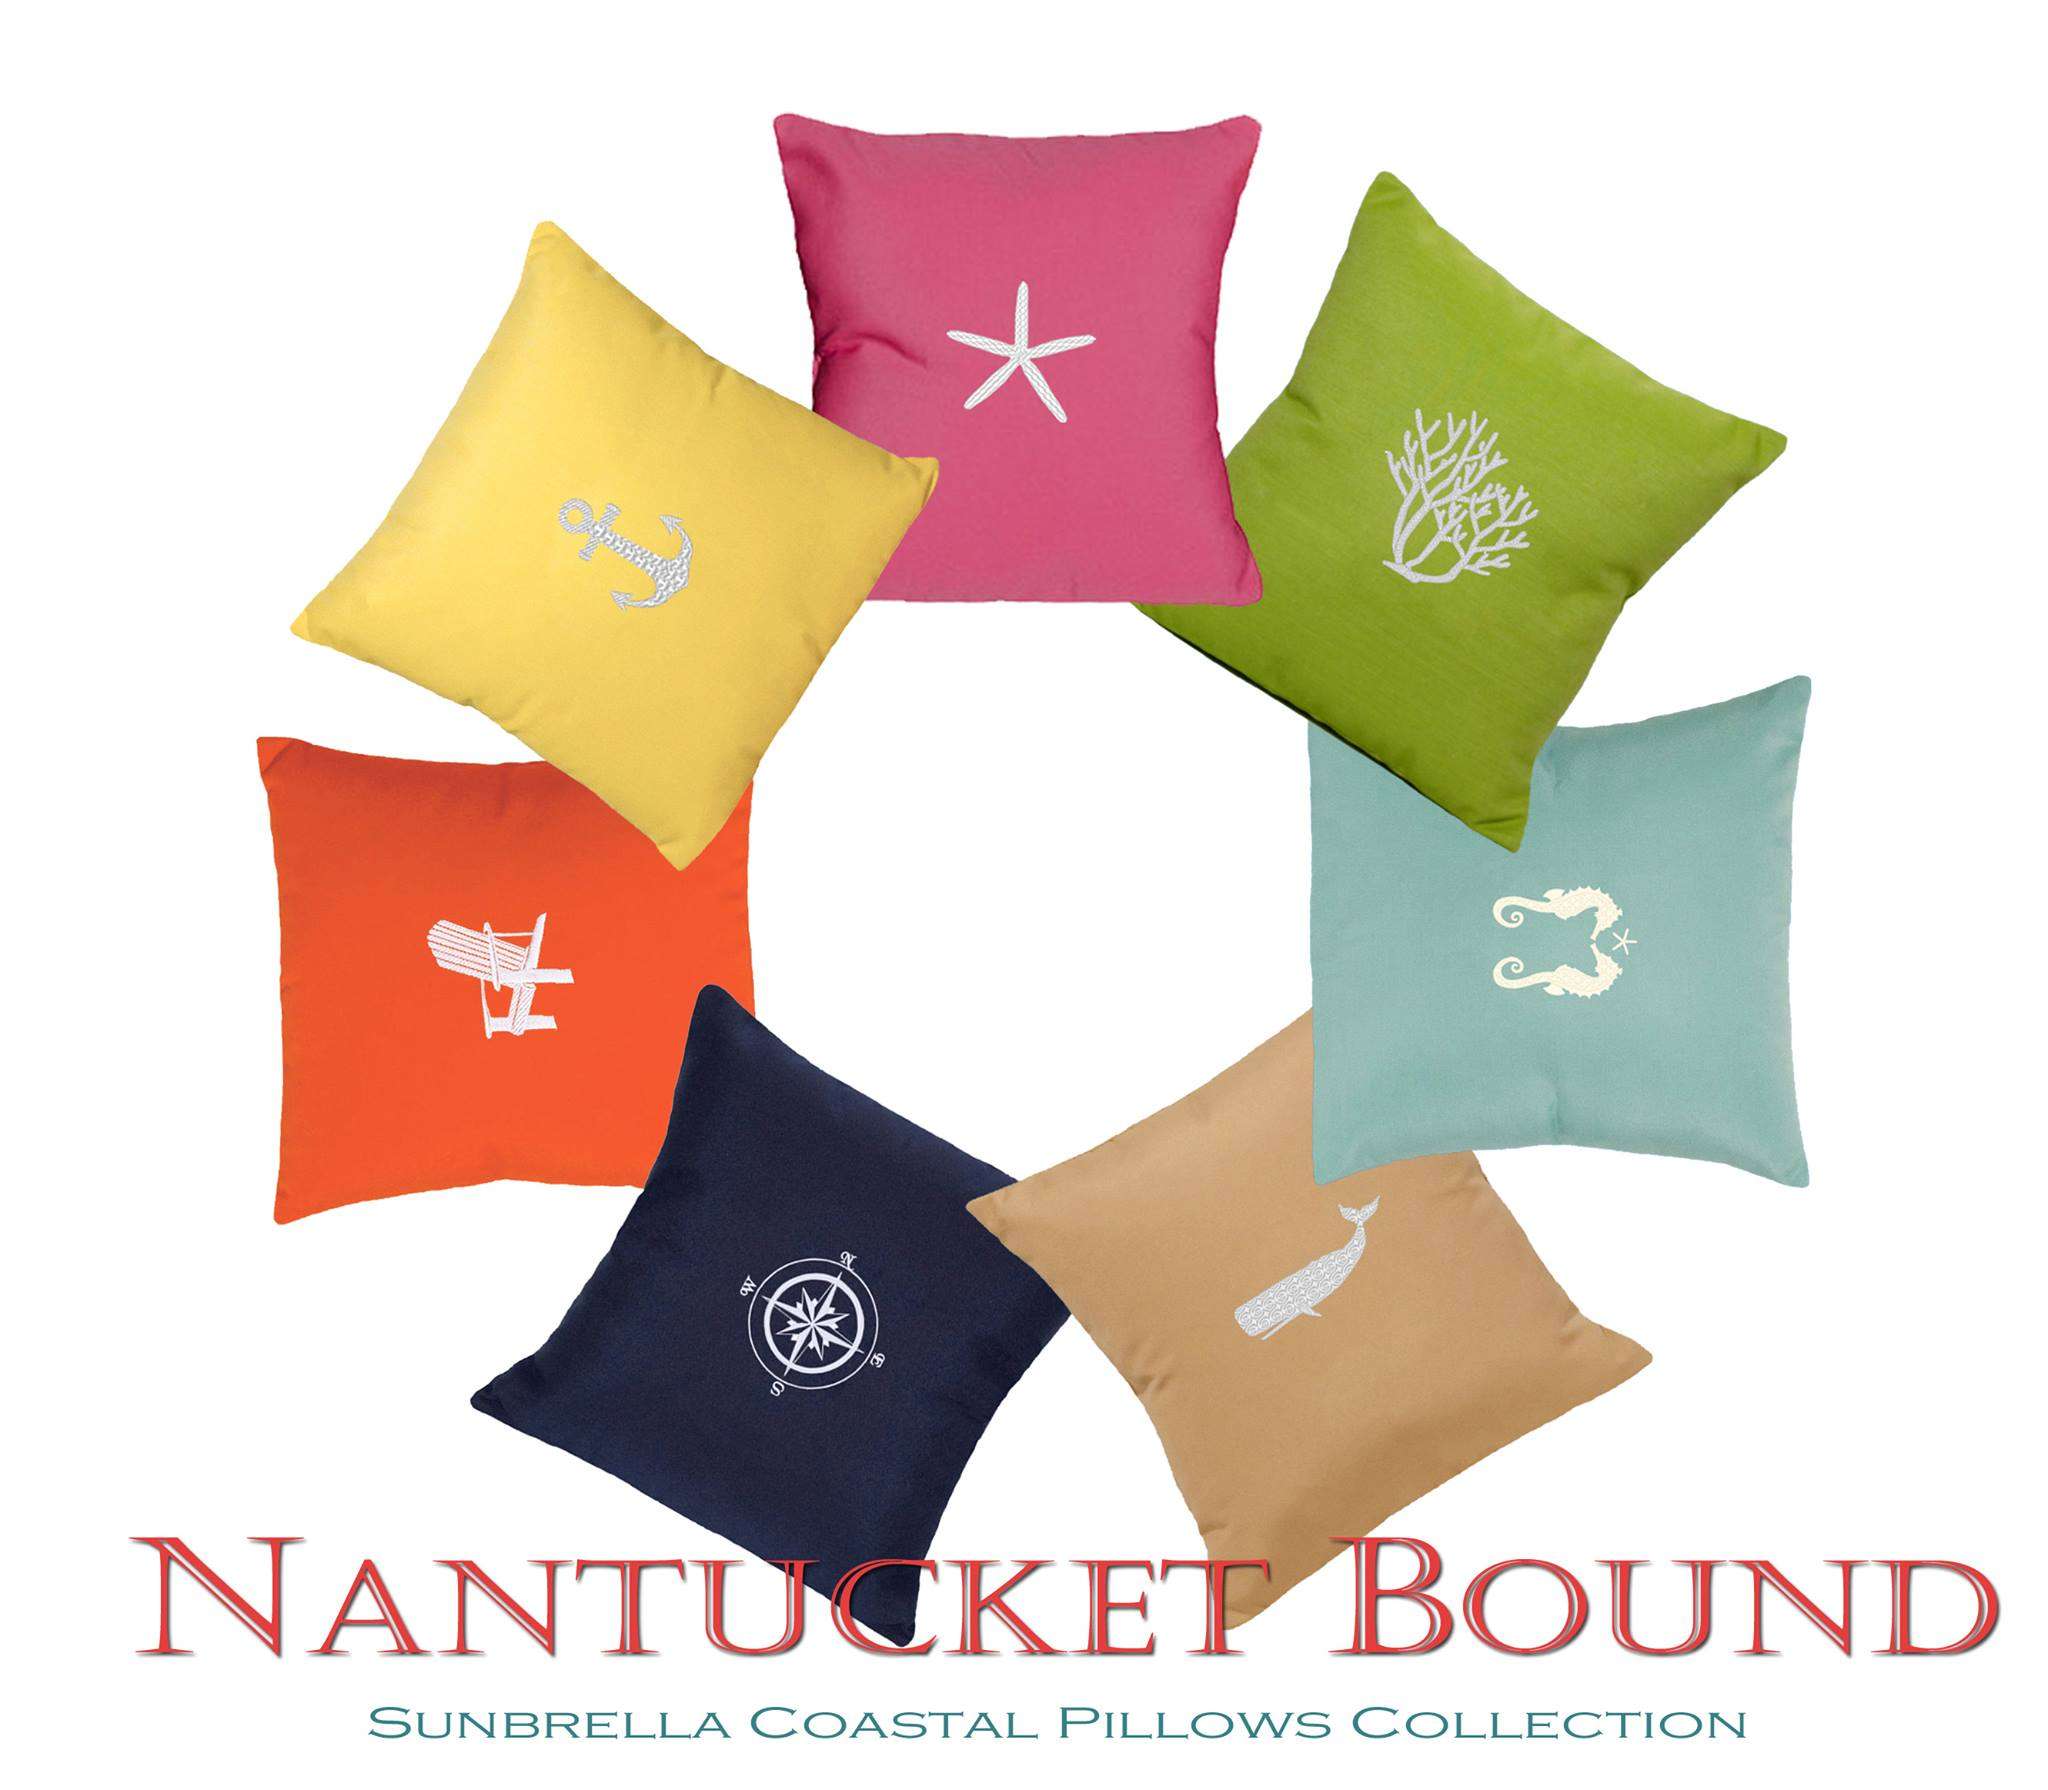 Boating & Fishing - Supplies, Accessories, & Gear - Nantucket Bound